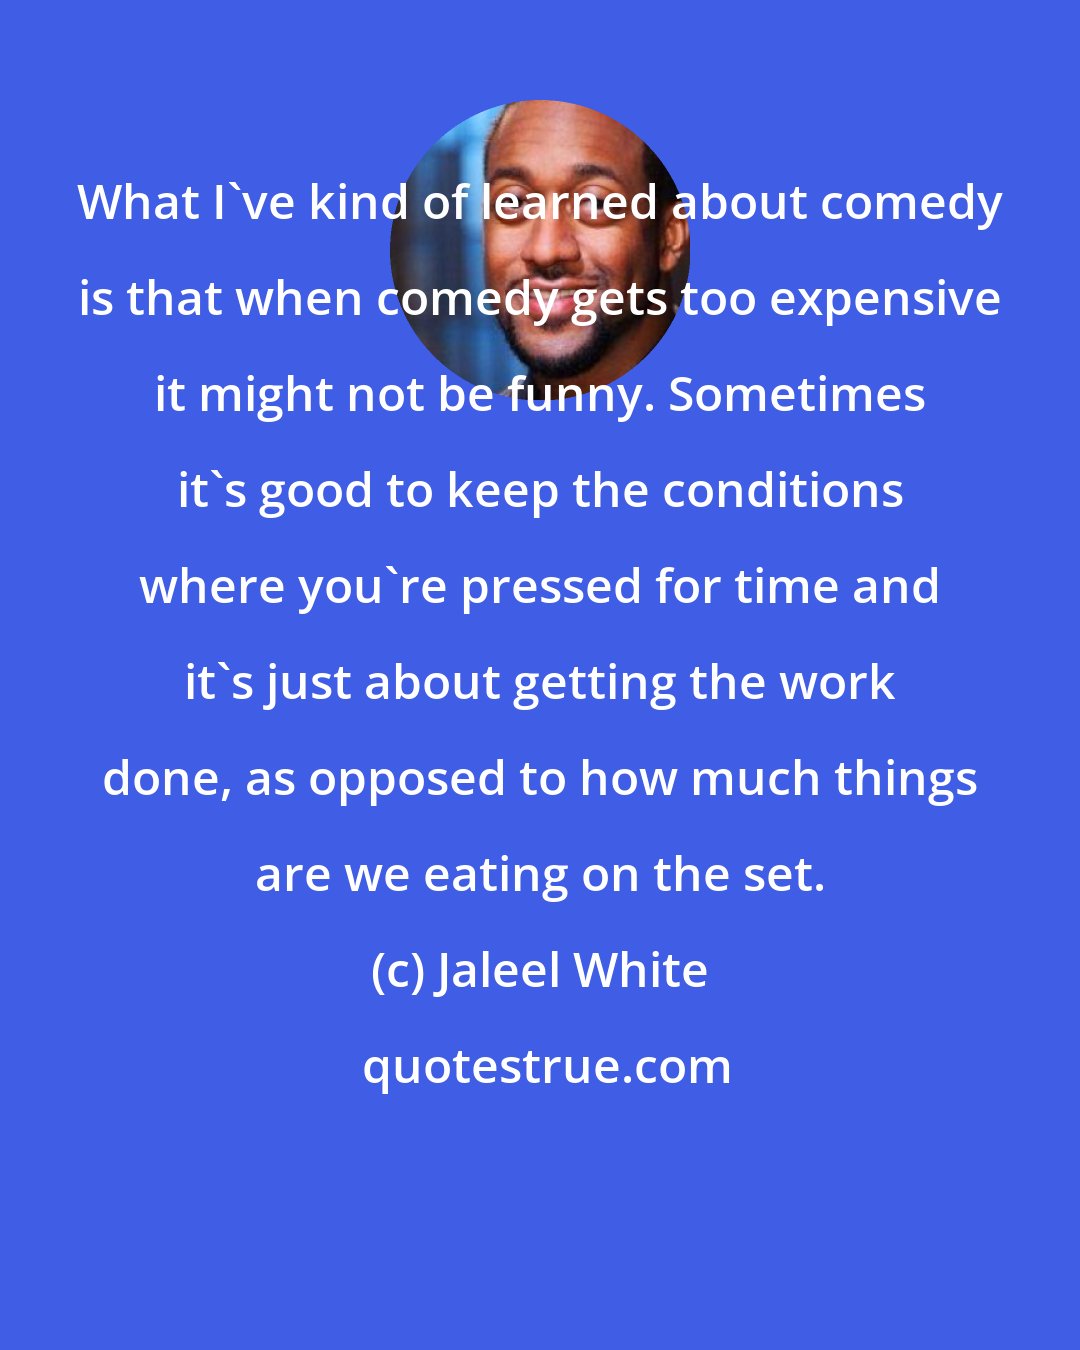 Jaleel White: What I've kind of learned about comedy is that when comedy gets too expensive it might not be funny. Sometimes it's good to keep the conditions where you're pressed for time and it's just about getting the work done, as opposed to how much things are we eating on the set.